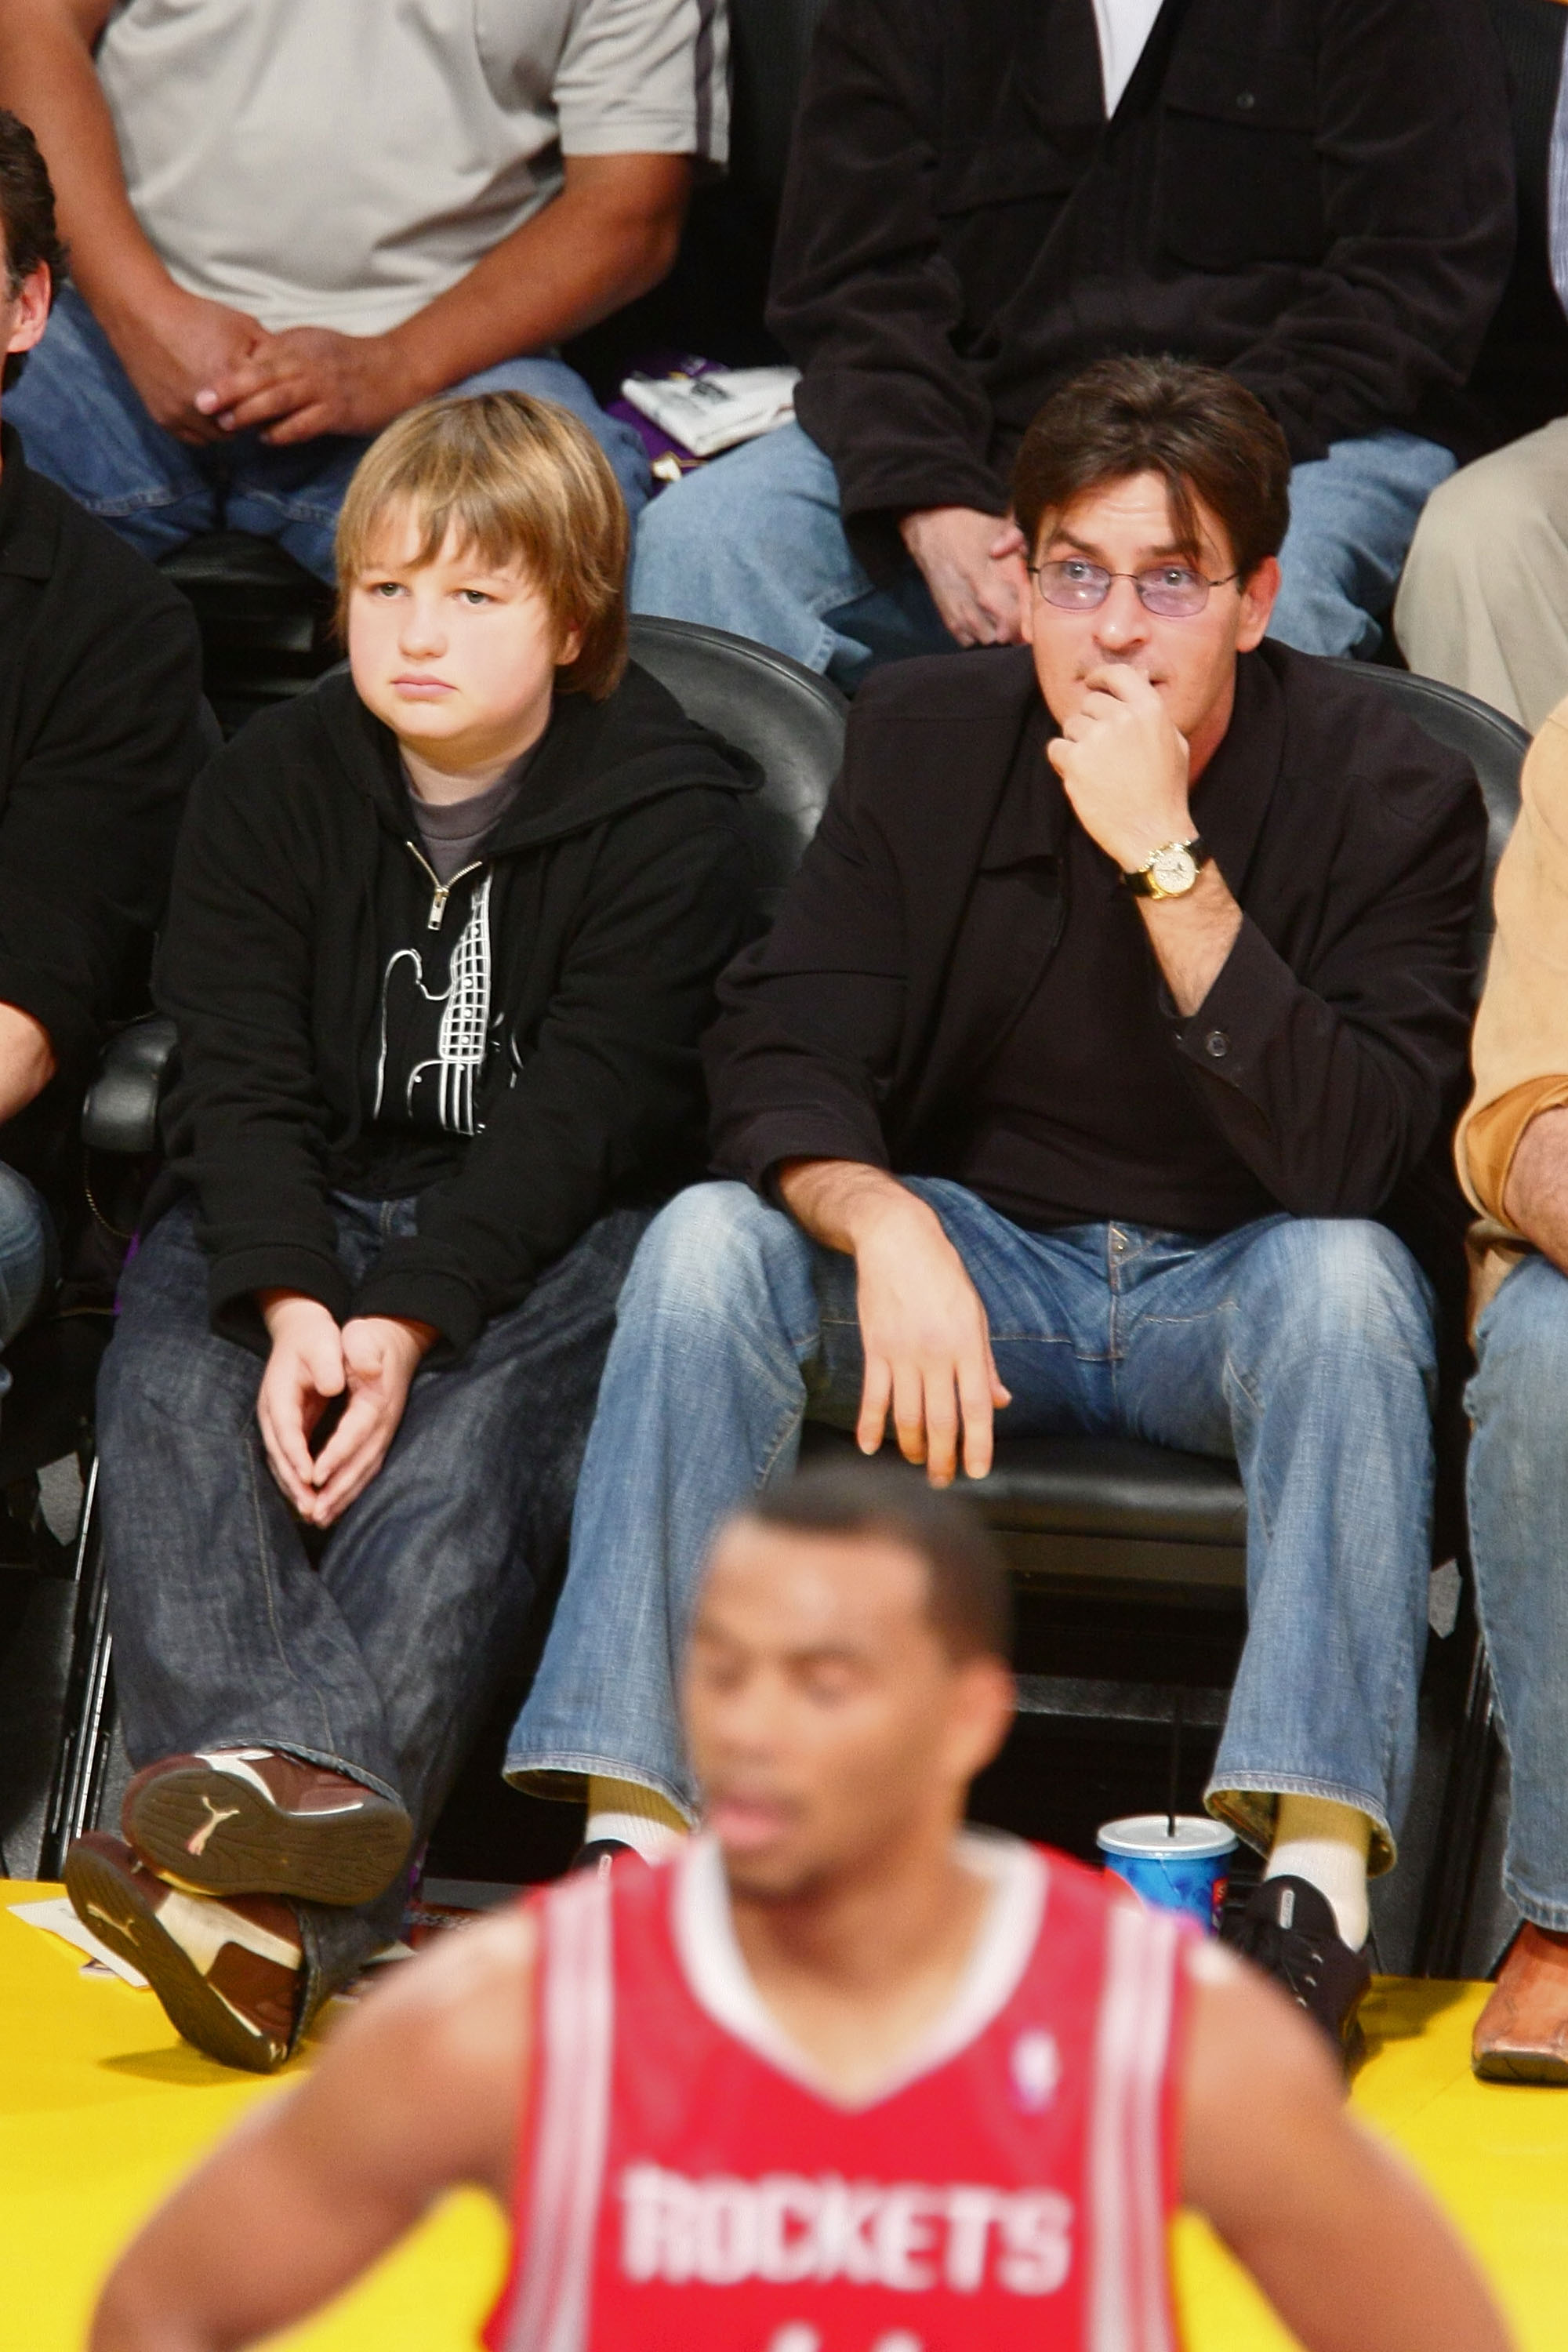 Charlie Sheen and Angus T Jones at the LA Lakers game in California in 2007 | Source: Getty Images